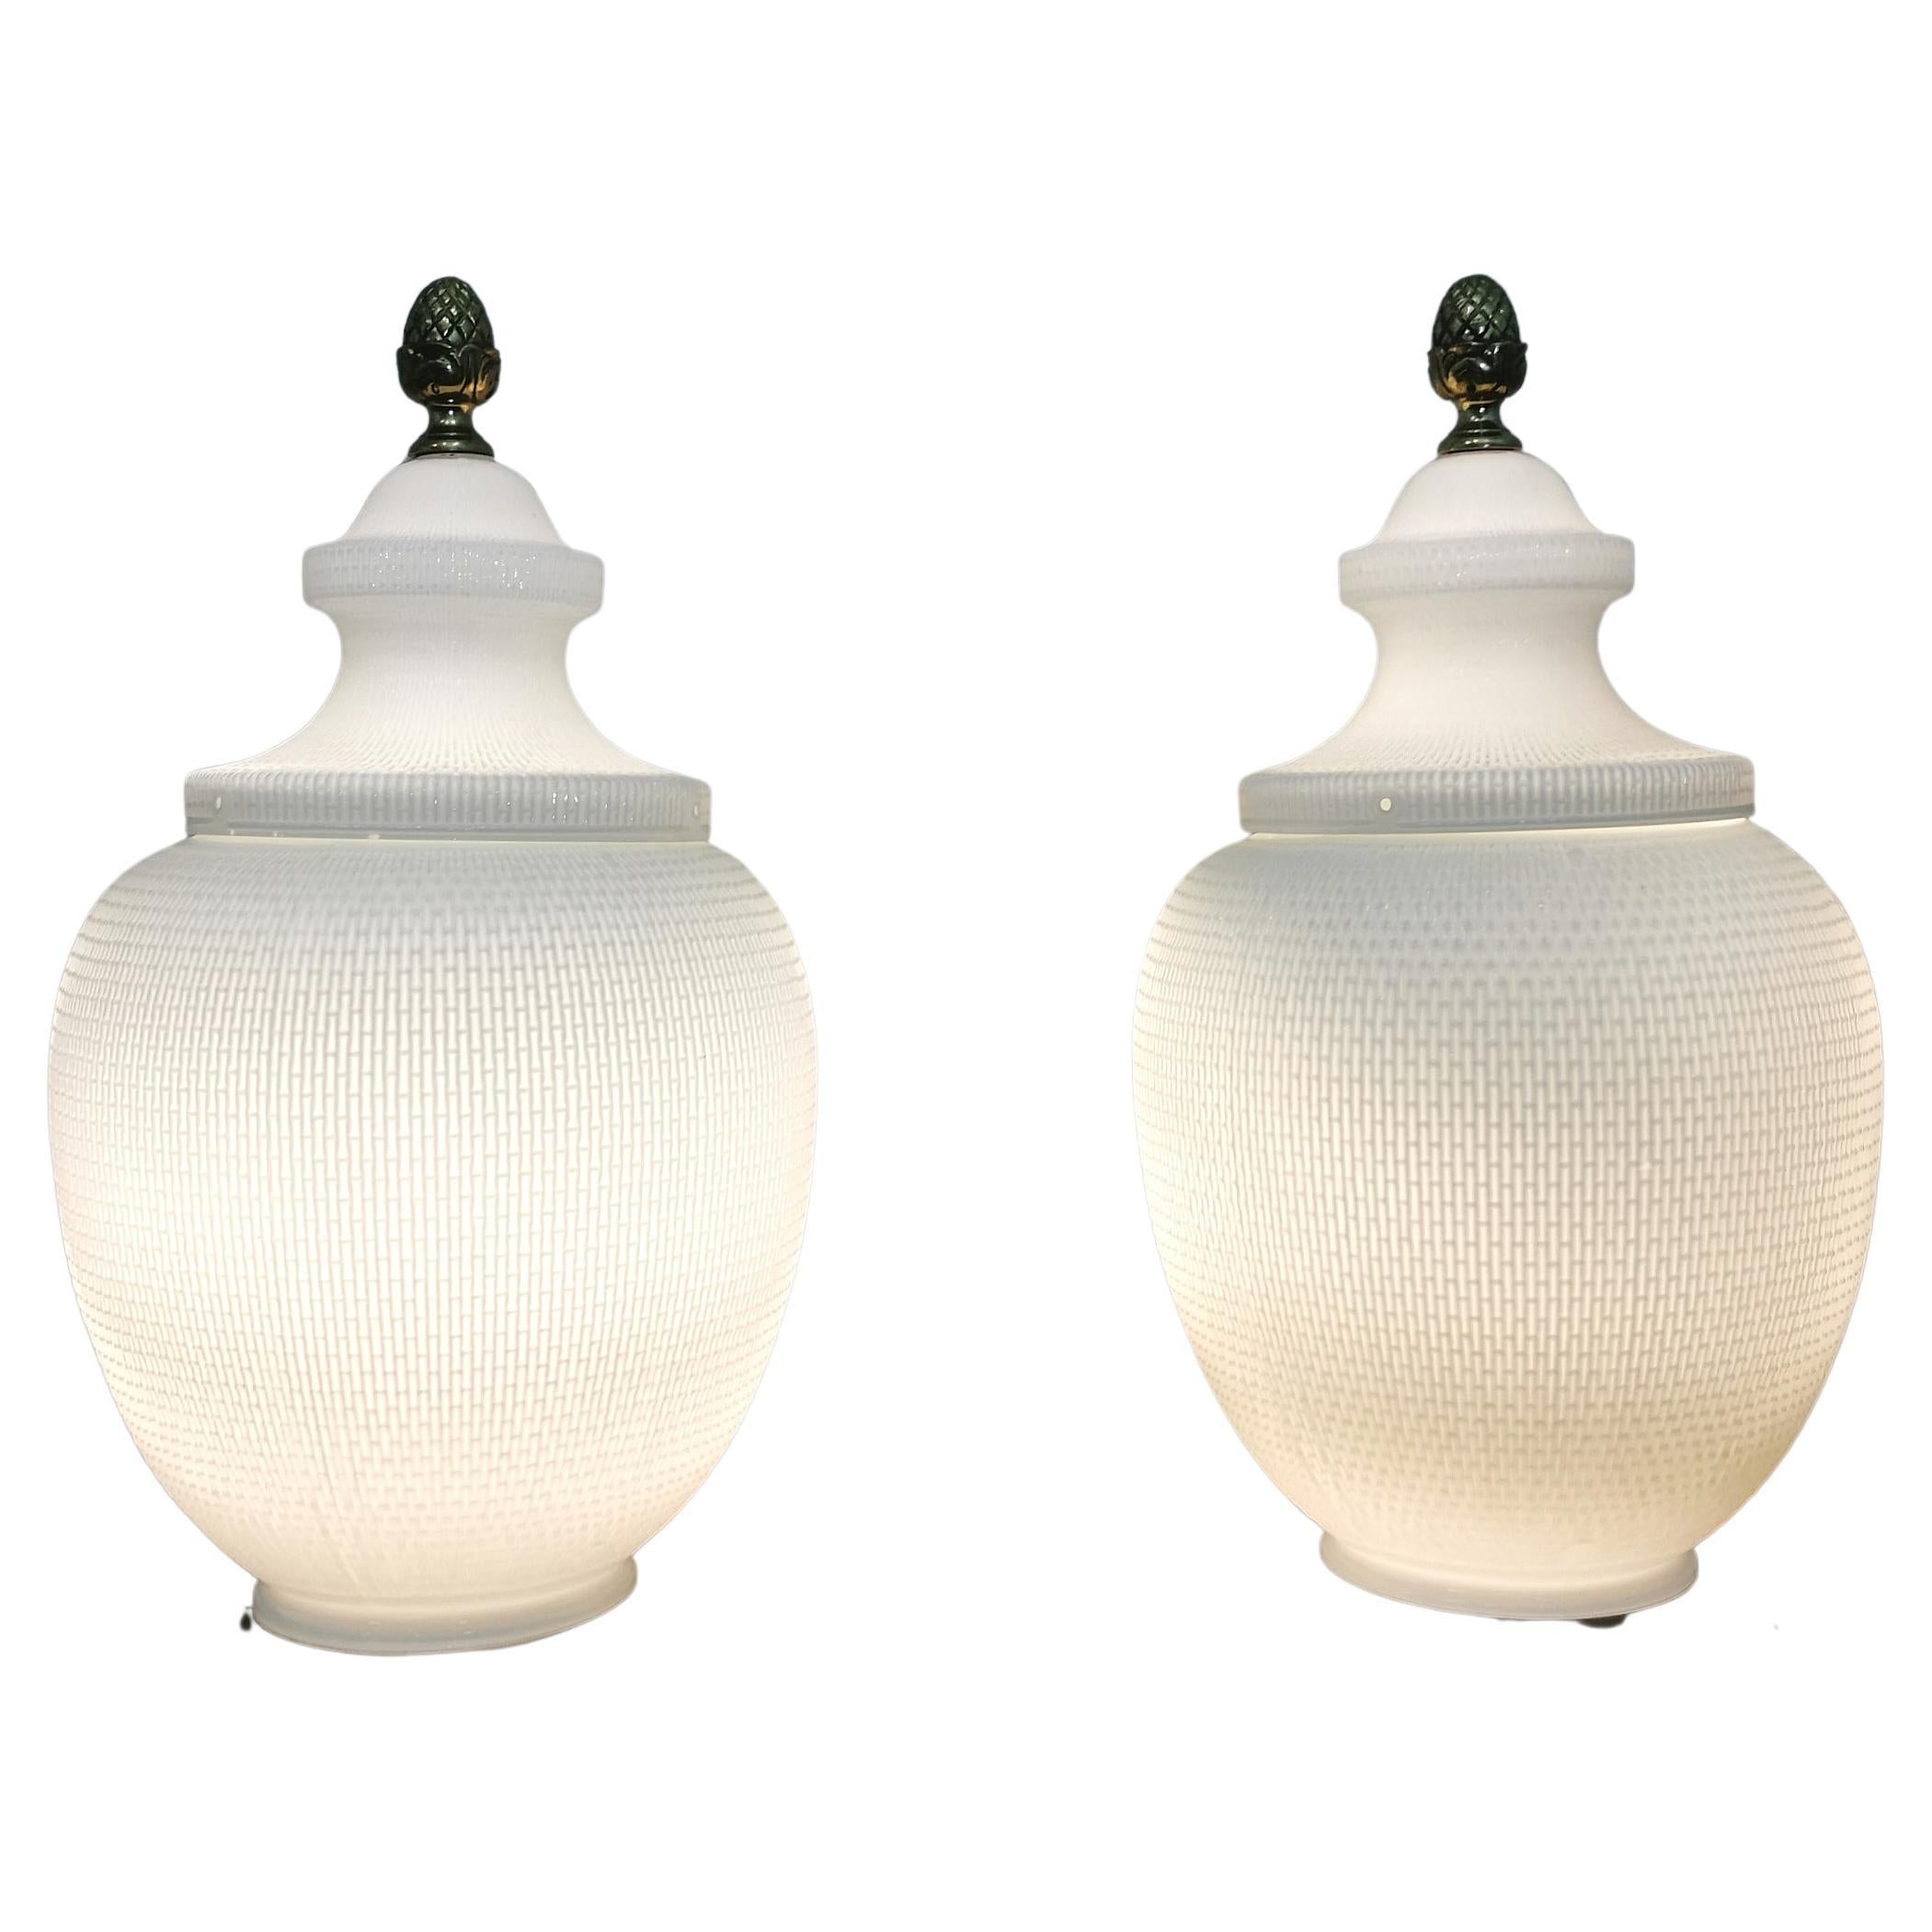 Rare and imponent pair of potiche table lamps produced in Italy in the 1980s. Each single lamp has a square-shaped base in enamelled wood that supports a large bowl with a lid made with a particular workmanship in white coated Murano glass. Brass